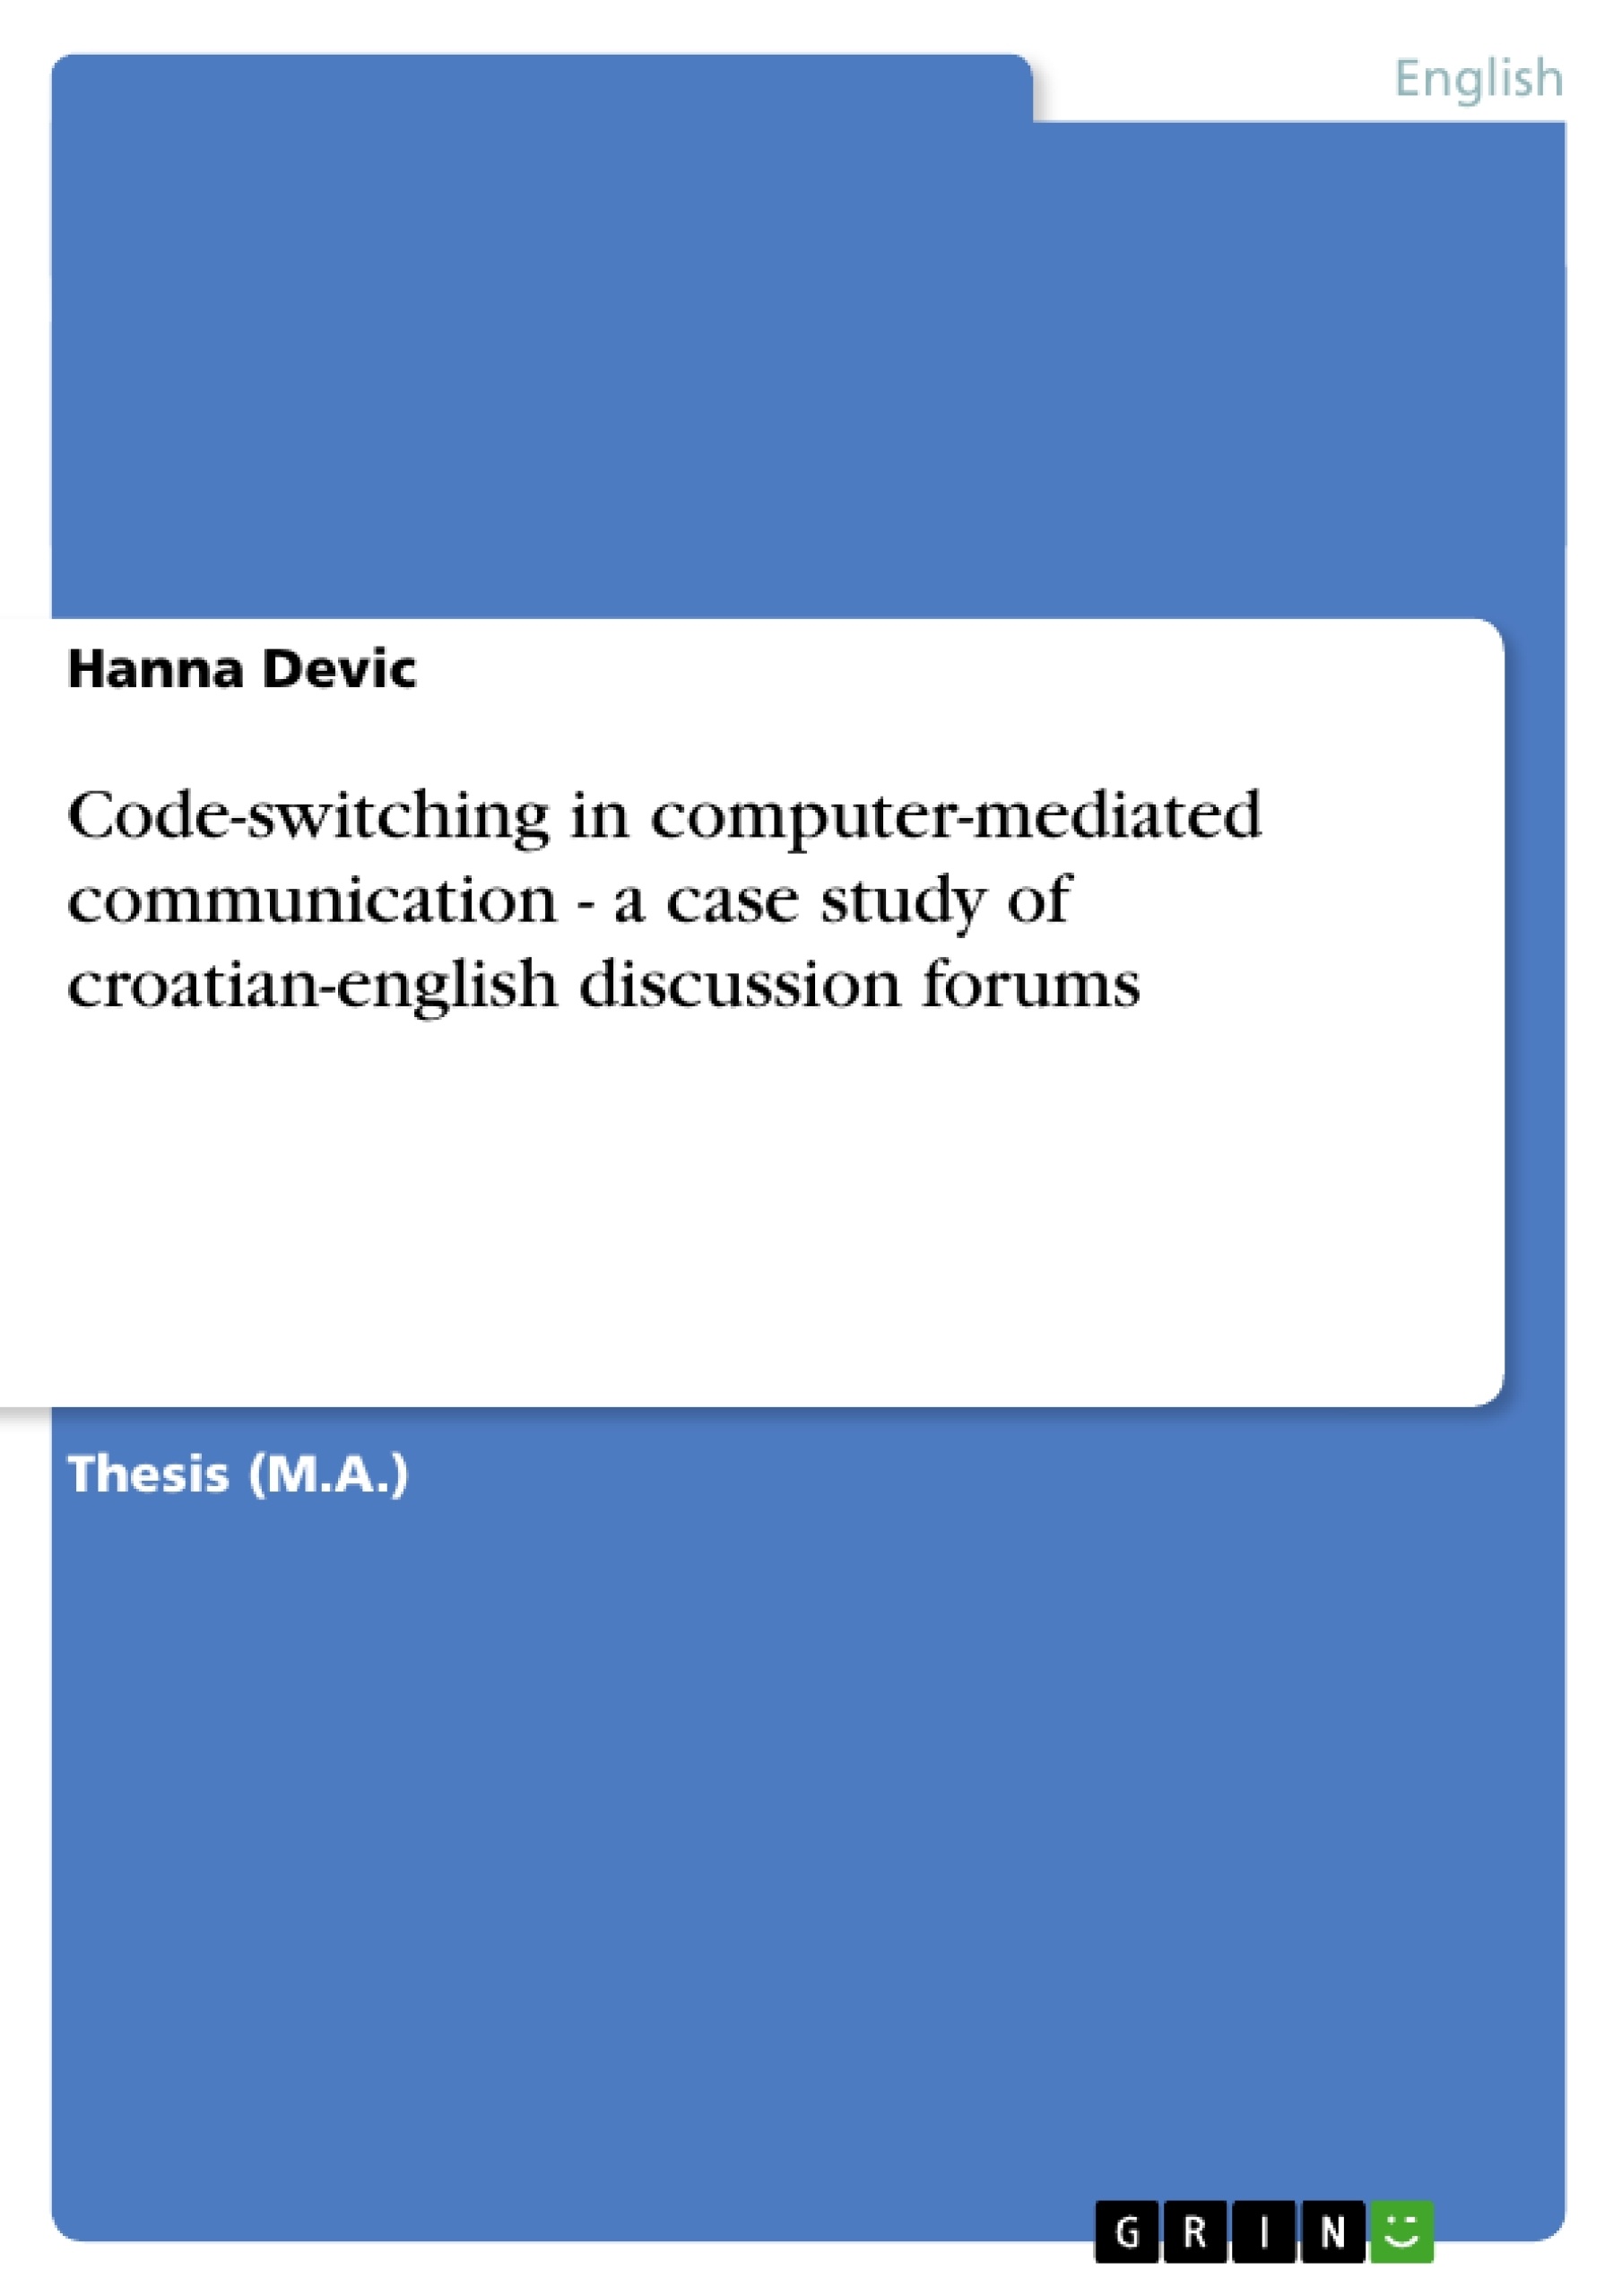 Title: Code-switching in computer-mediated communication - a case study of croatian-english discussion forums